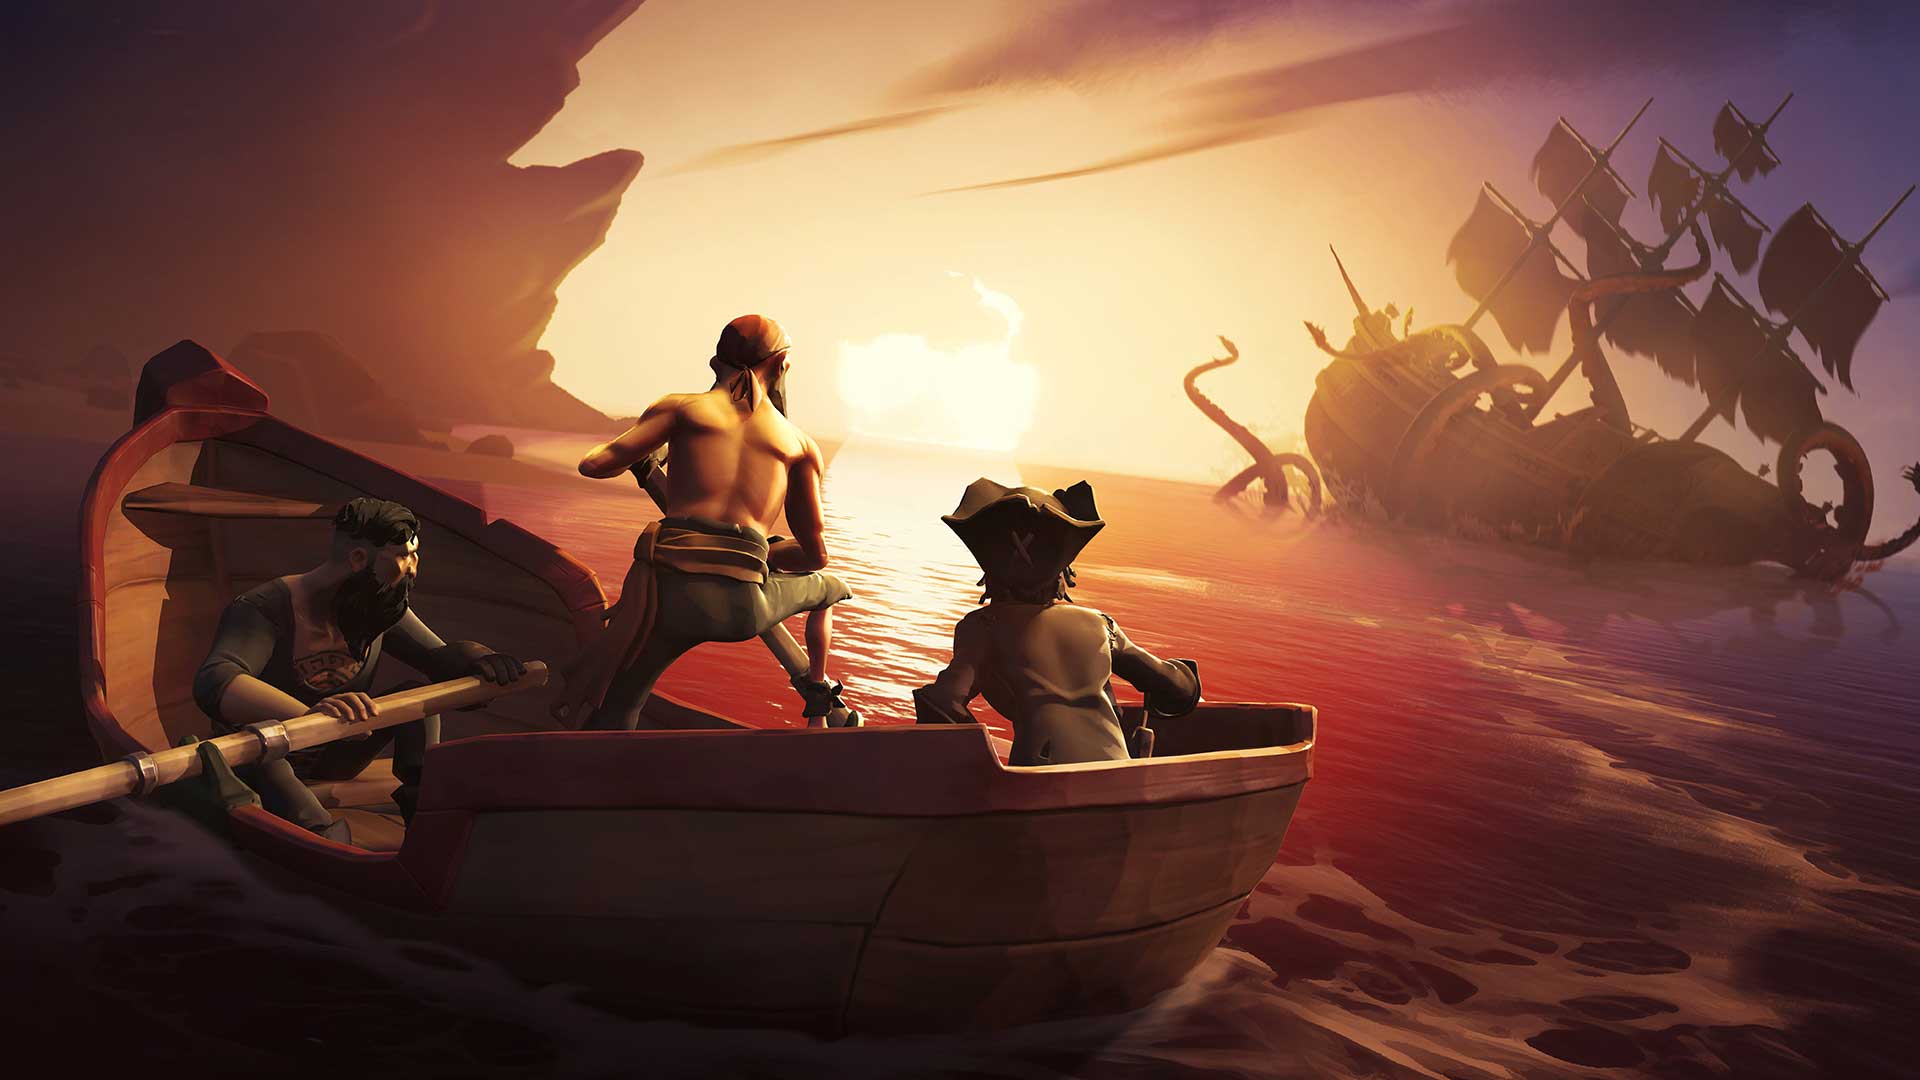 HQ Sea Of Thieves Wallpapers | File 100.19Kb